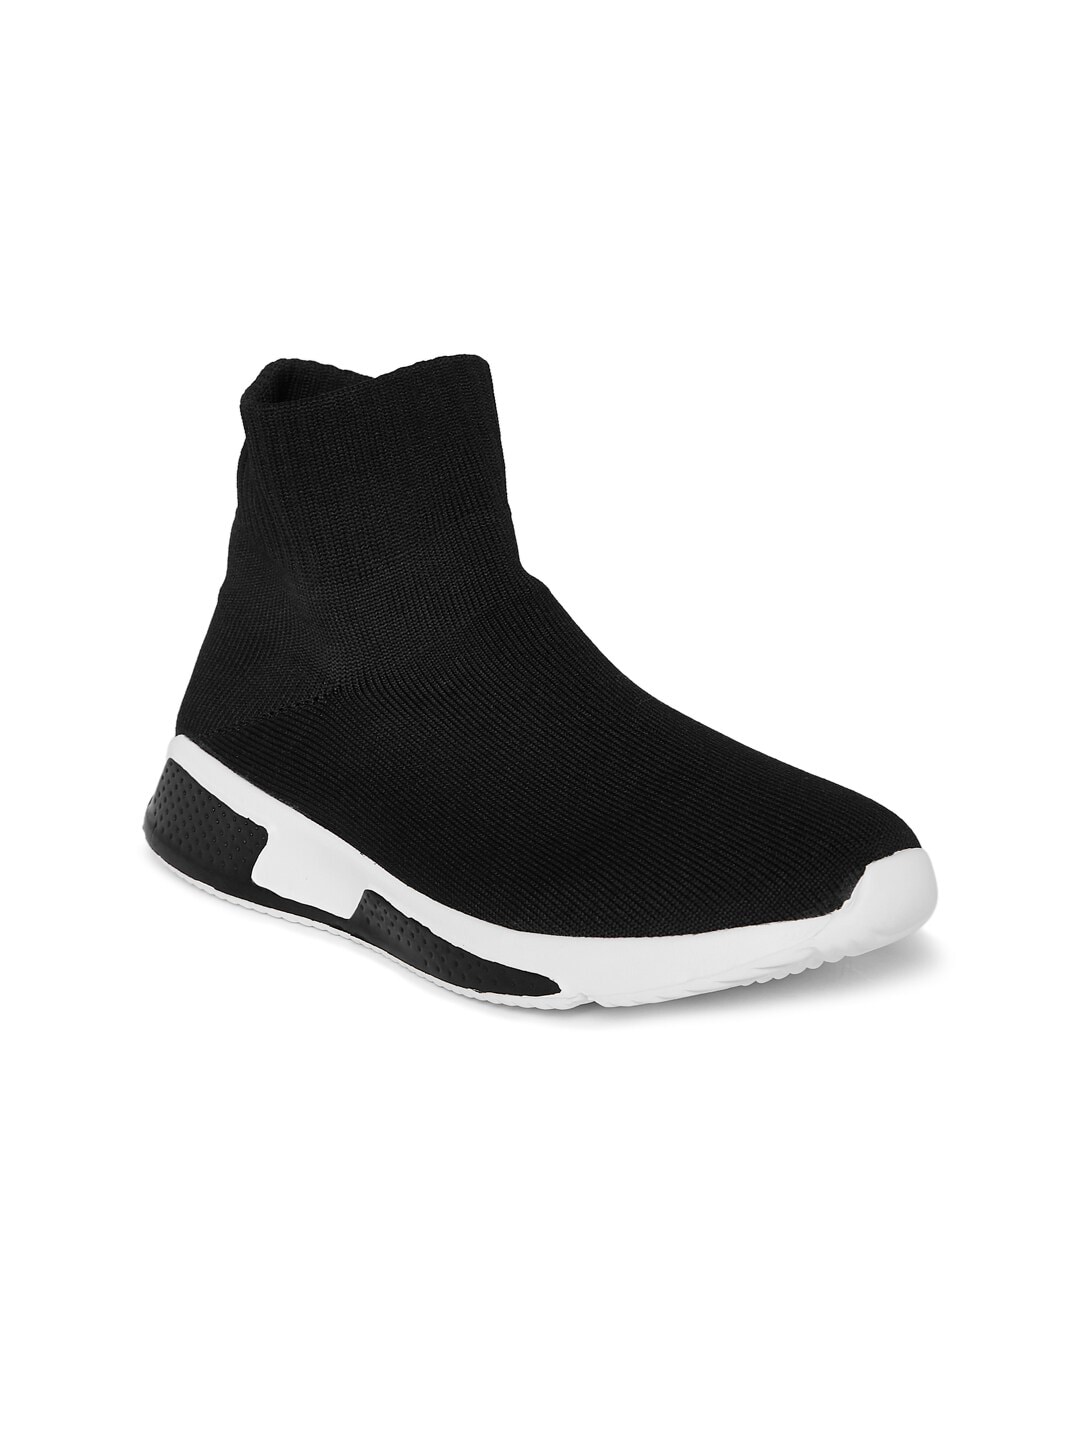 Forever Glam by Pantaloons Women Black Textile High-Top Running Non-Marking Shoes Price in India